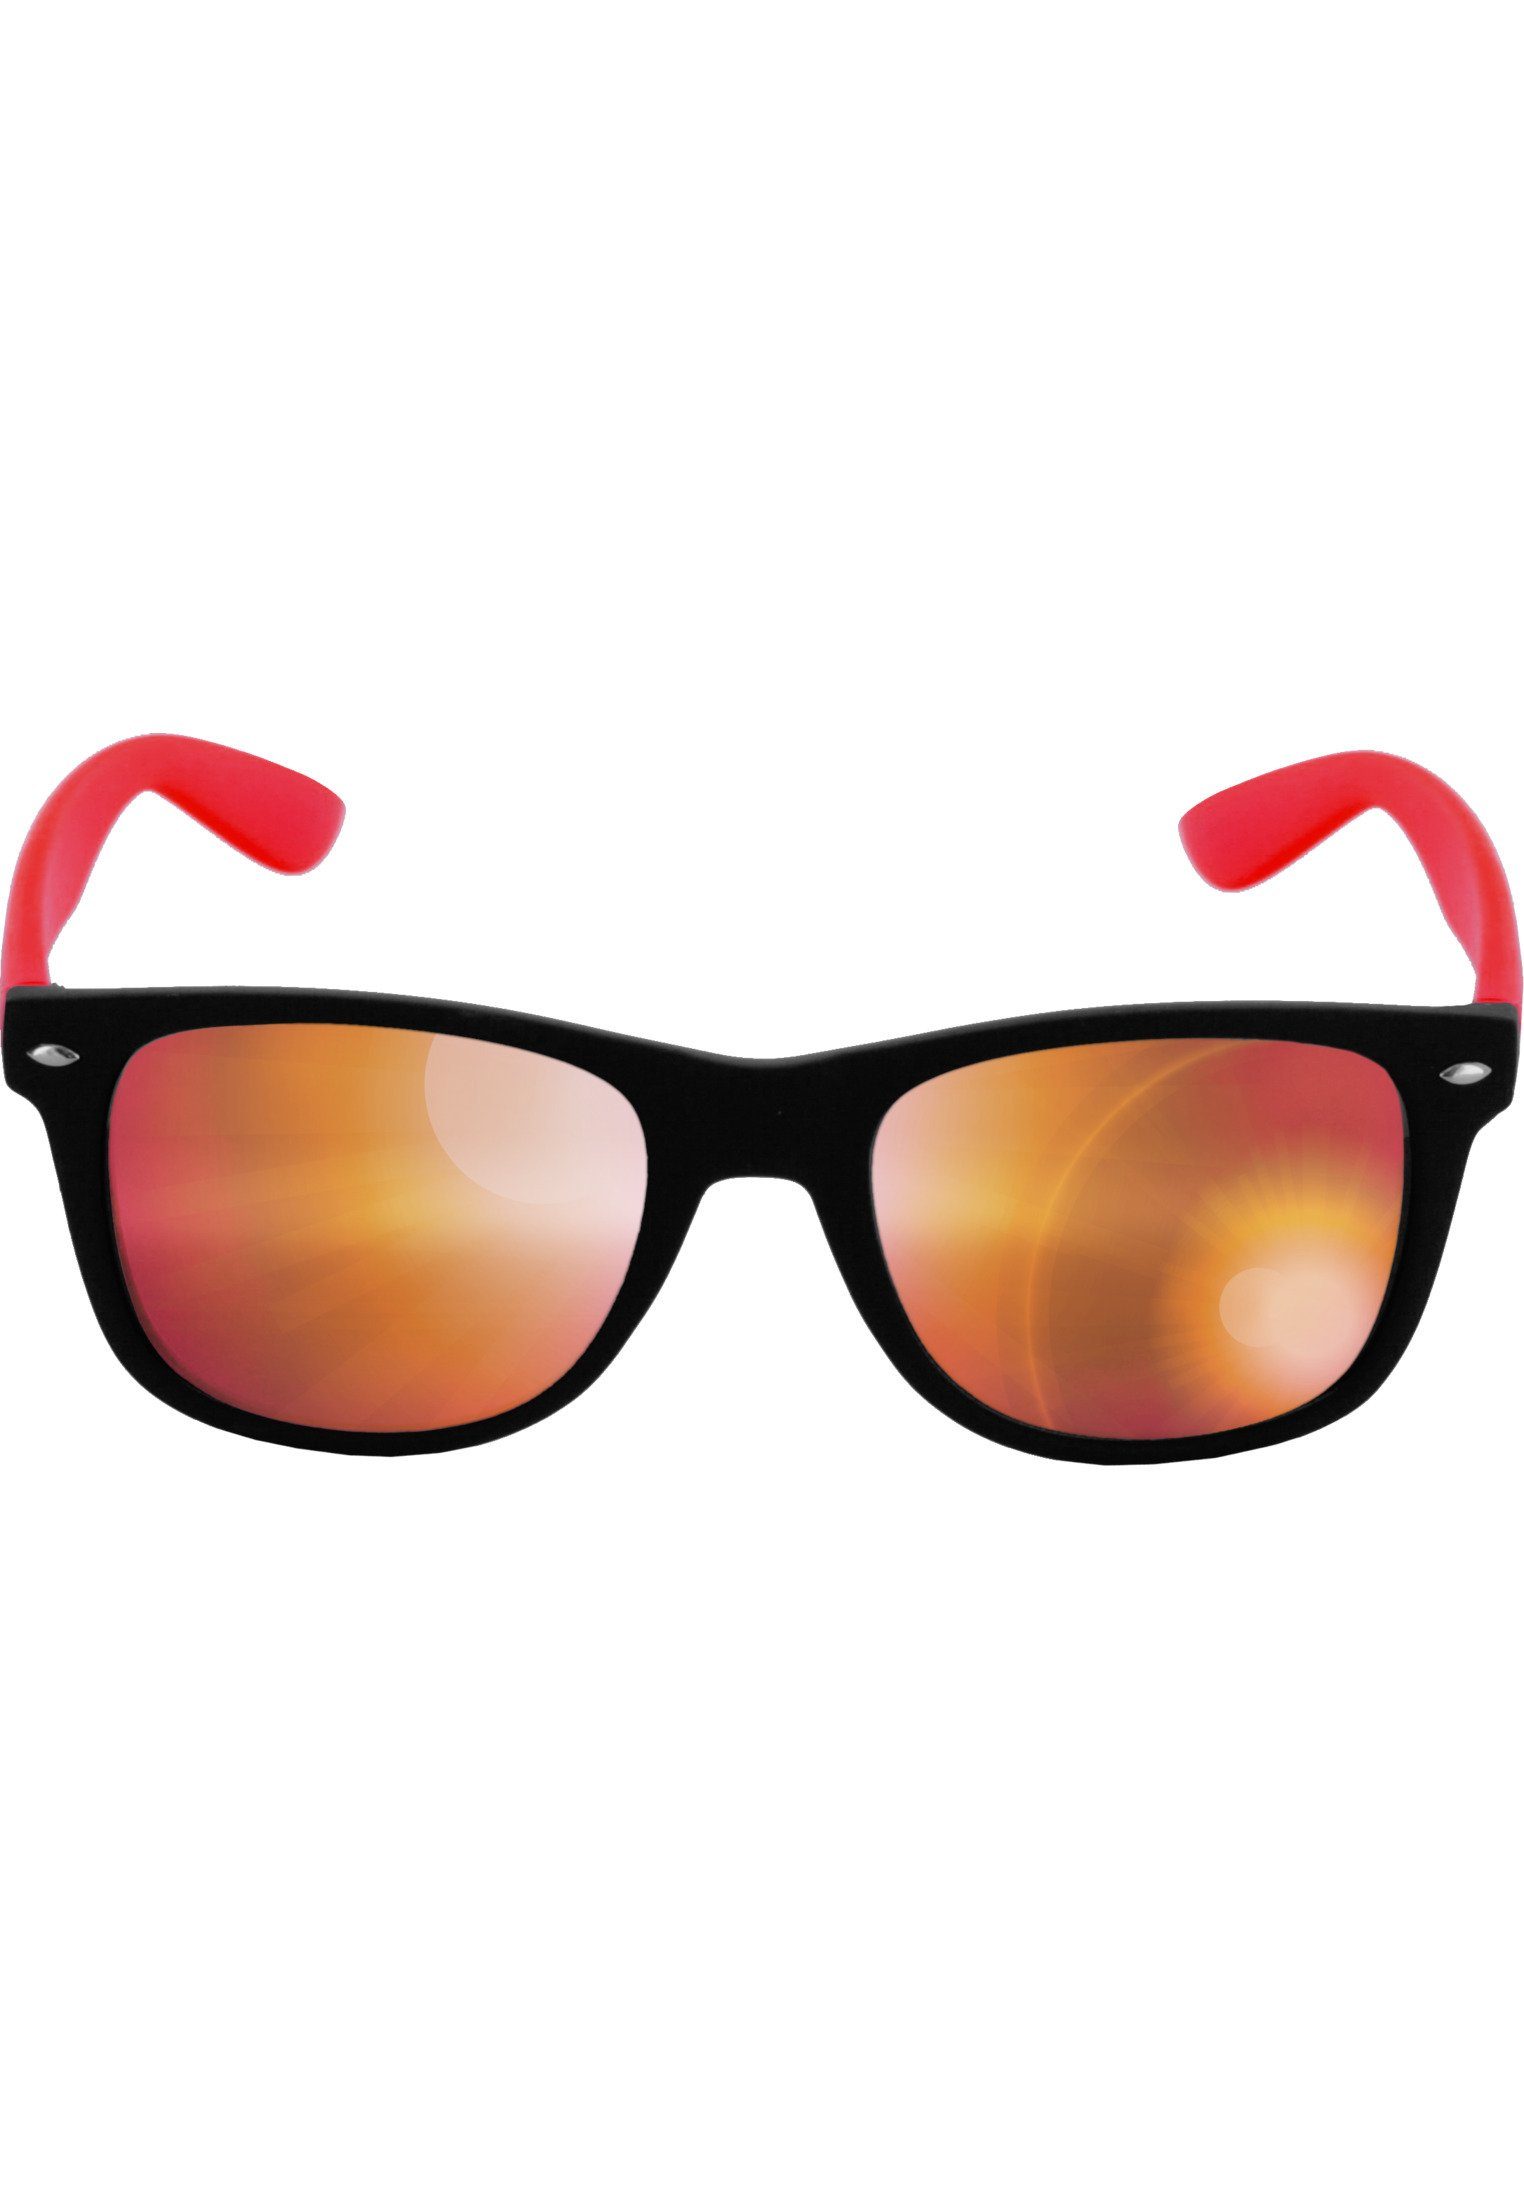 MSTRDS Sonnenbrille Accessoires Likoma blk/red/red Mirror Sunglasses